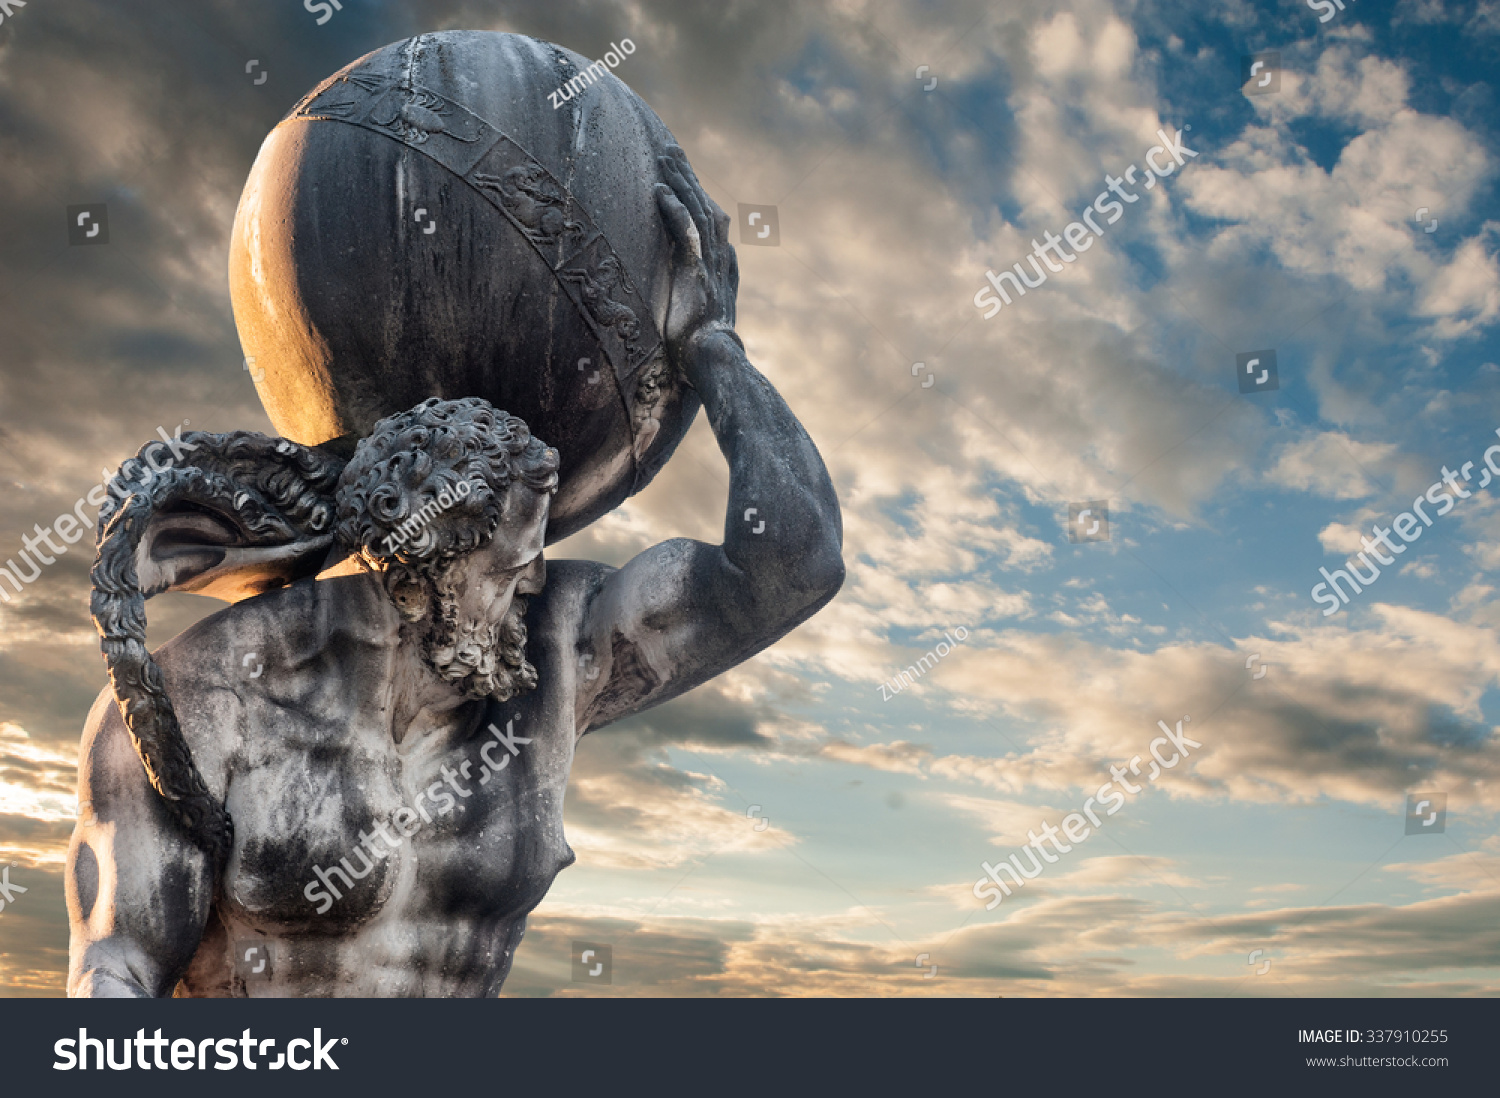 The Mythological Atlas Holding The World On His Shoulders Stock Photo Shutterstock